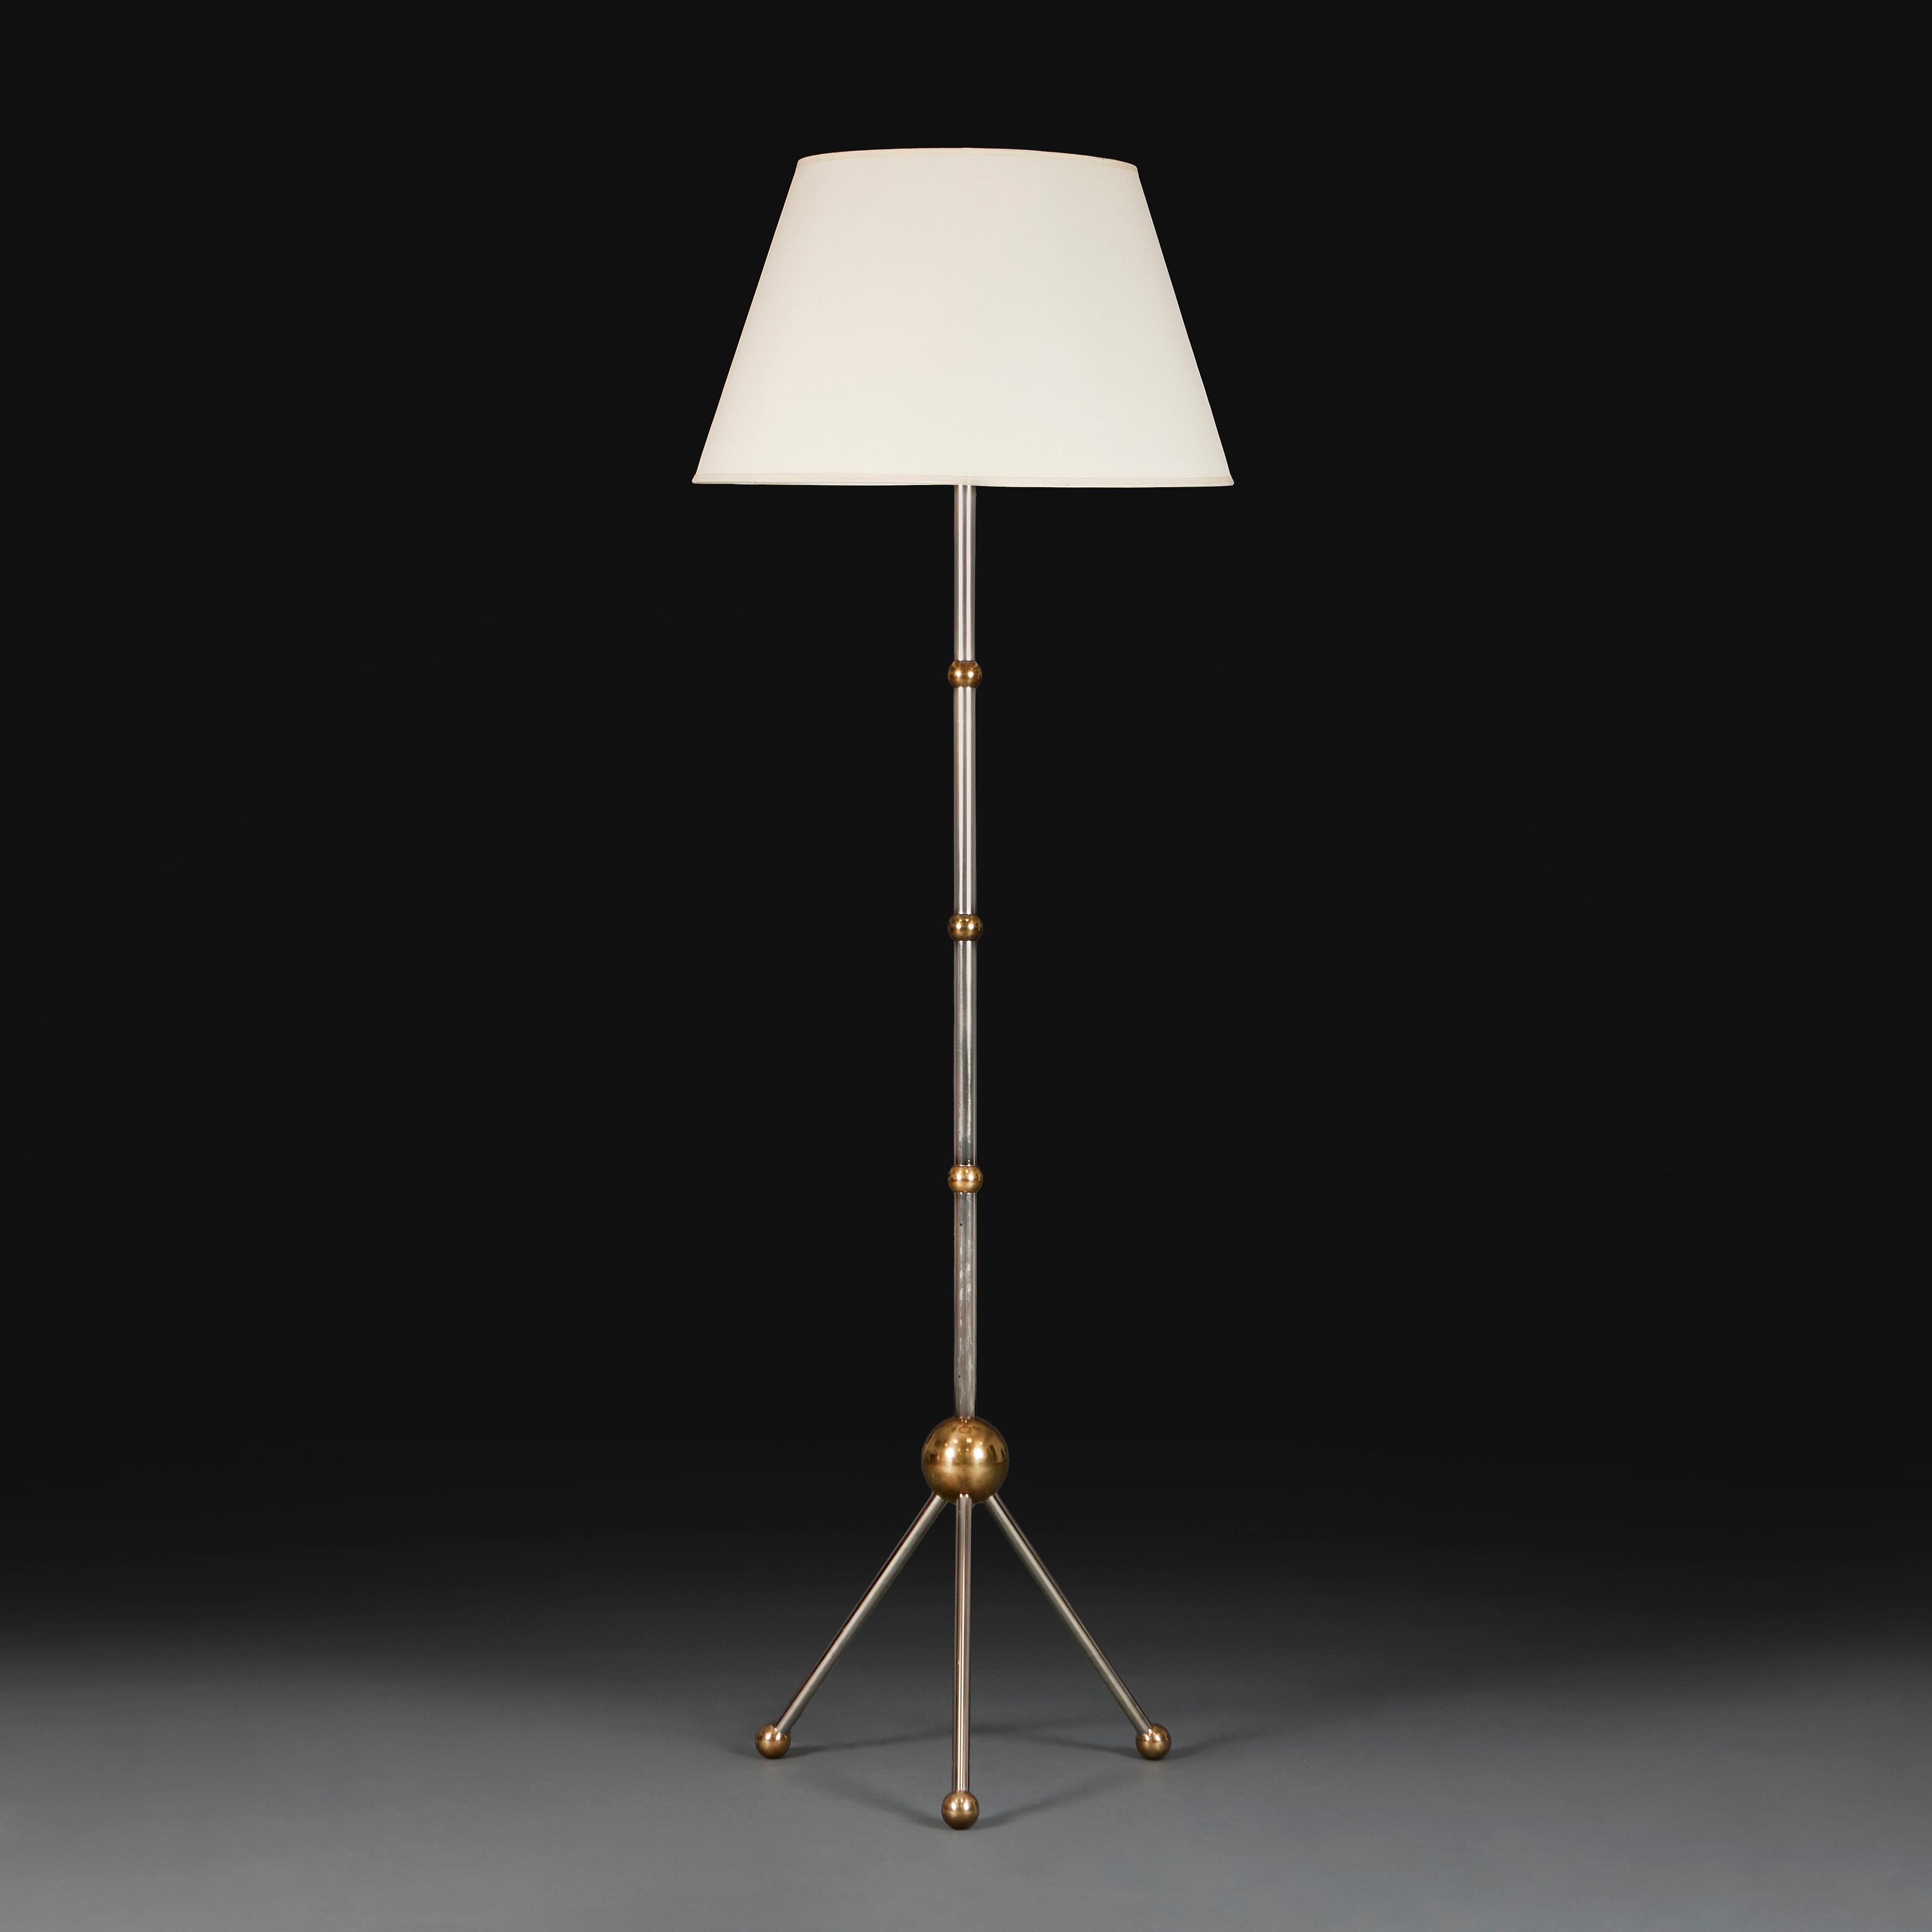 England, made to order.

A tripod floor lamp of sputnik design, in contrasting polished steel and brass. 

Lead time 5 – 7 weeks. 

Height 151.00cm

Width of base 47.00cm

Photographed with a 24” diameter Pembroke card lampshade.

Please note: This